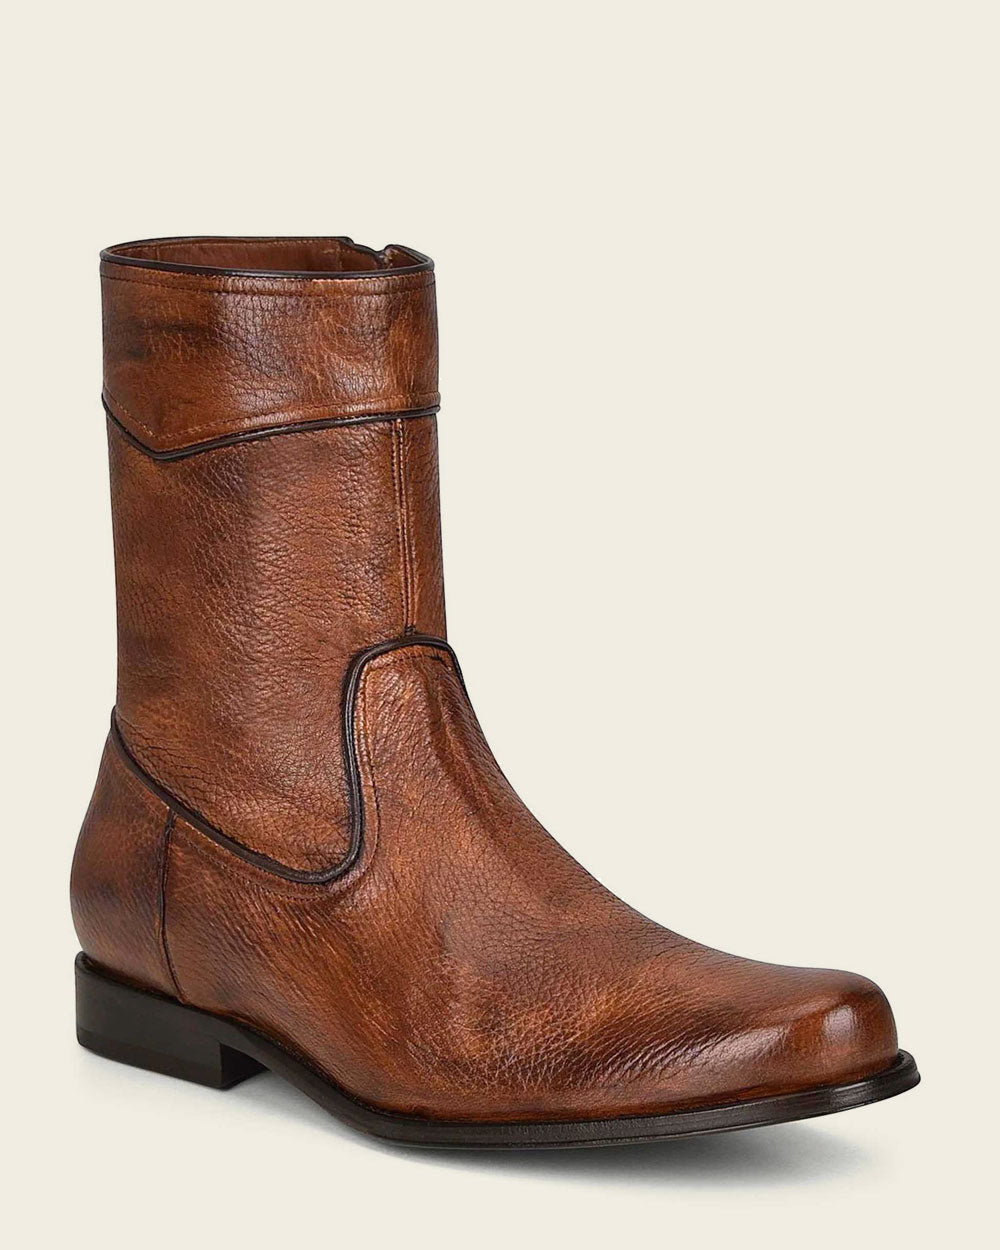 Introducing our exceptional Men's Hand-painted honey deer leather boots by franco cuadra - a testament to elegance and comfort.